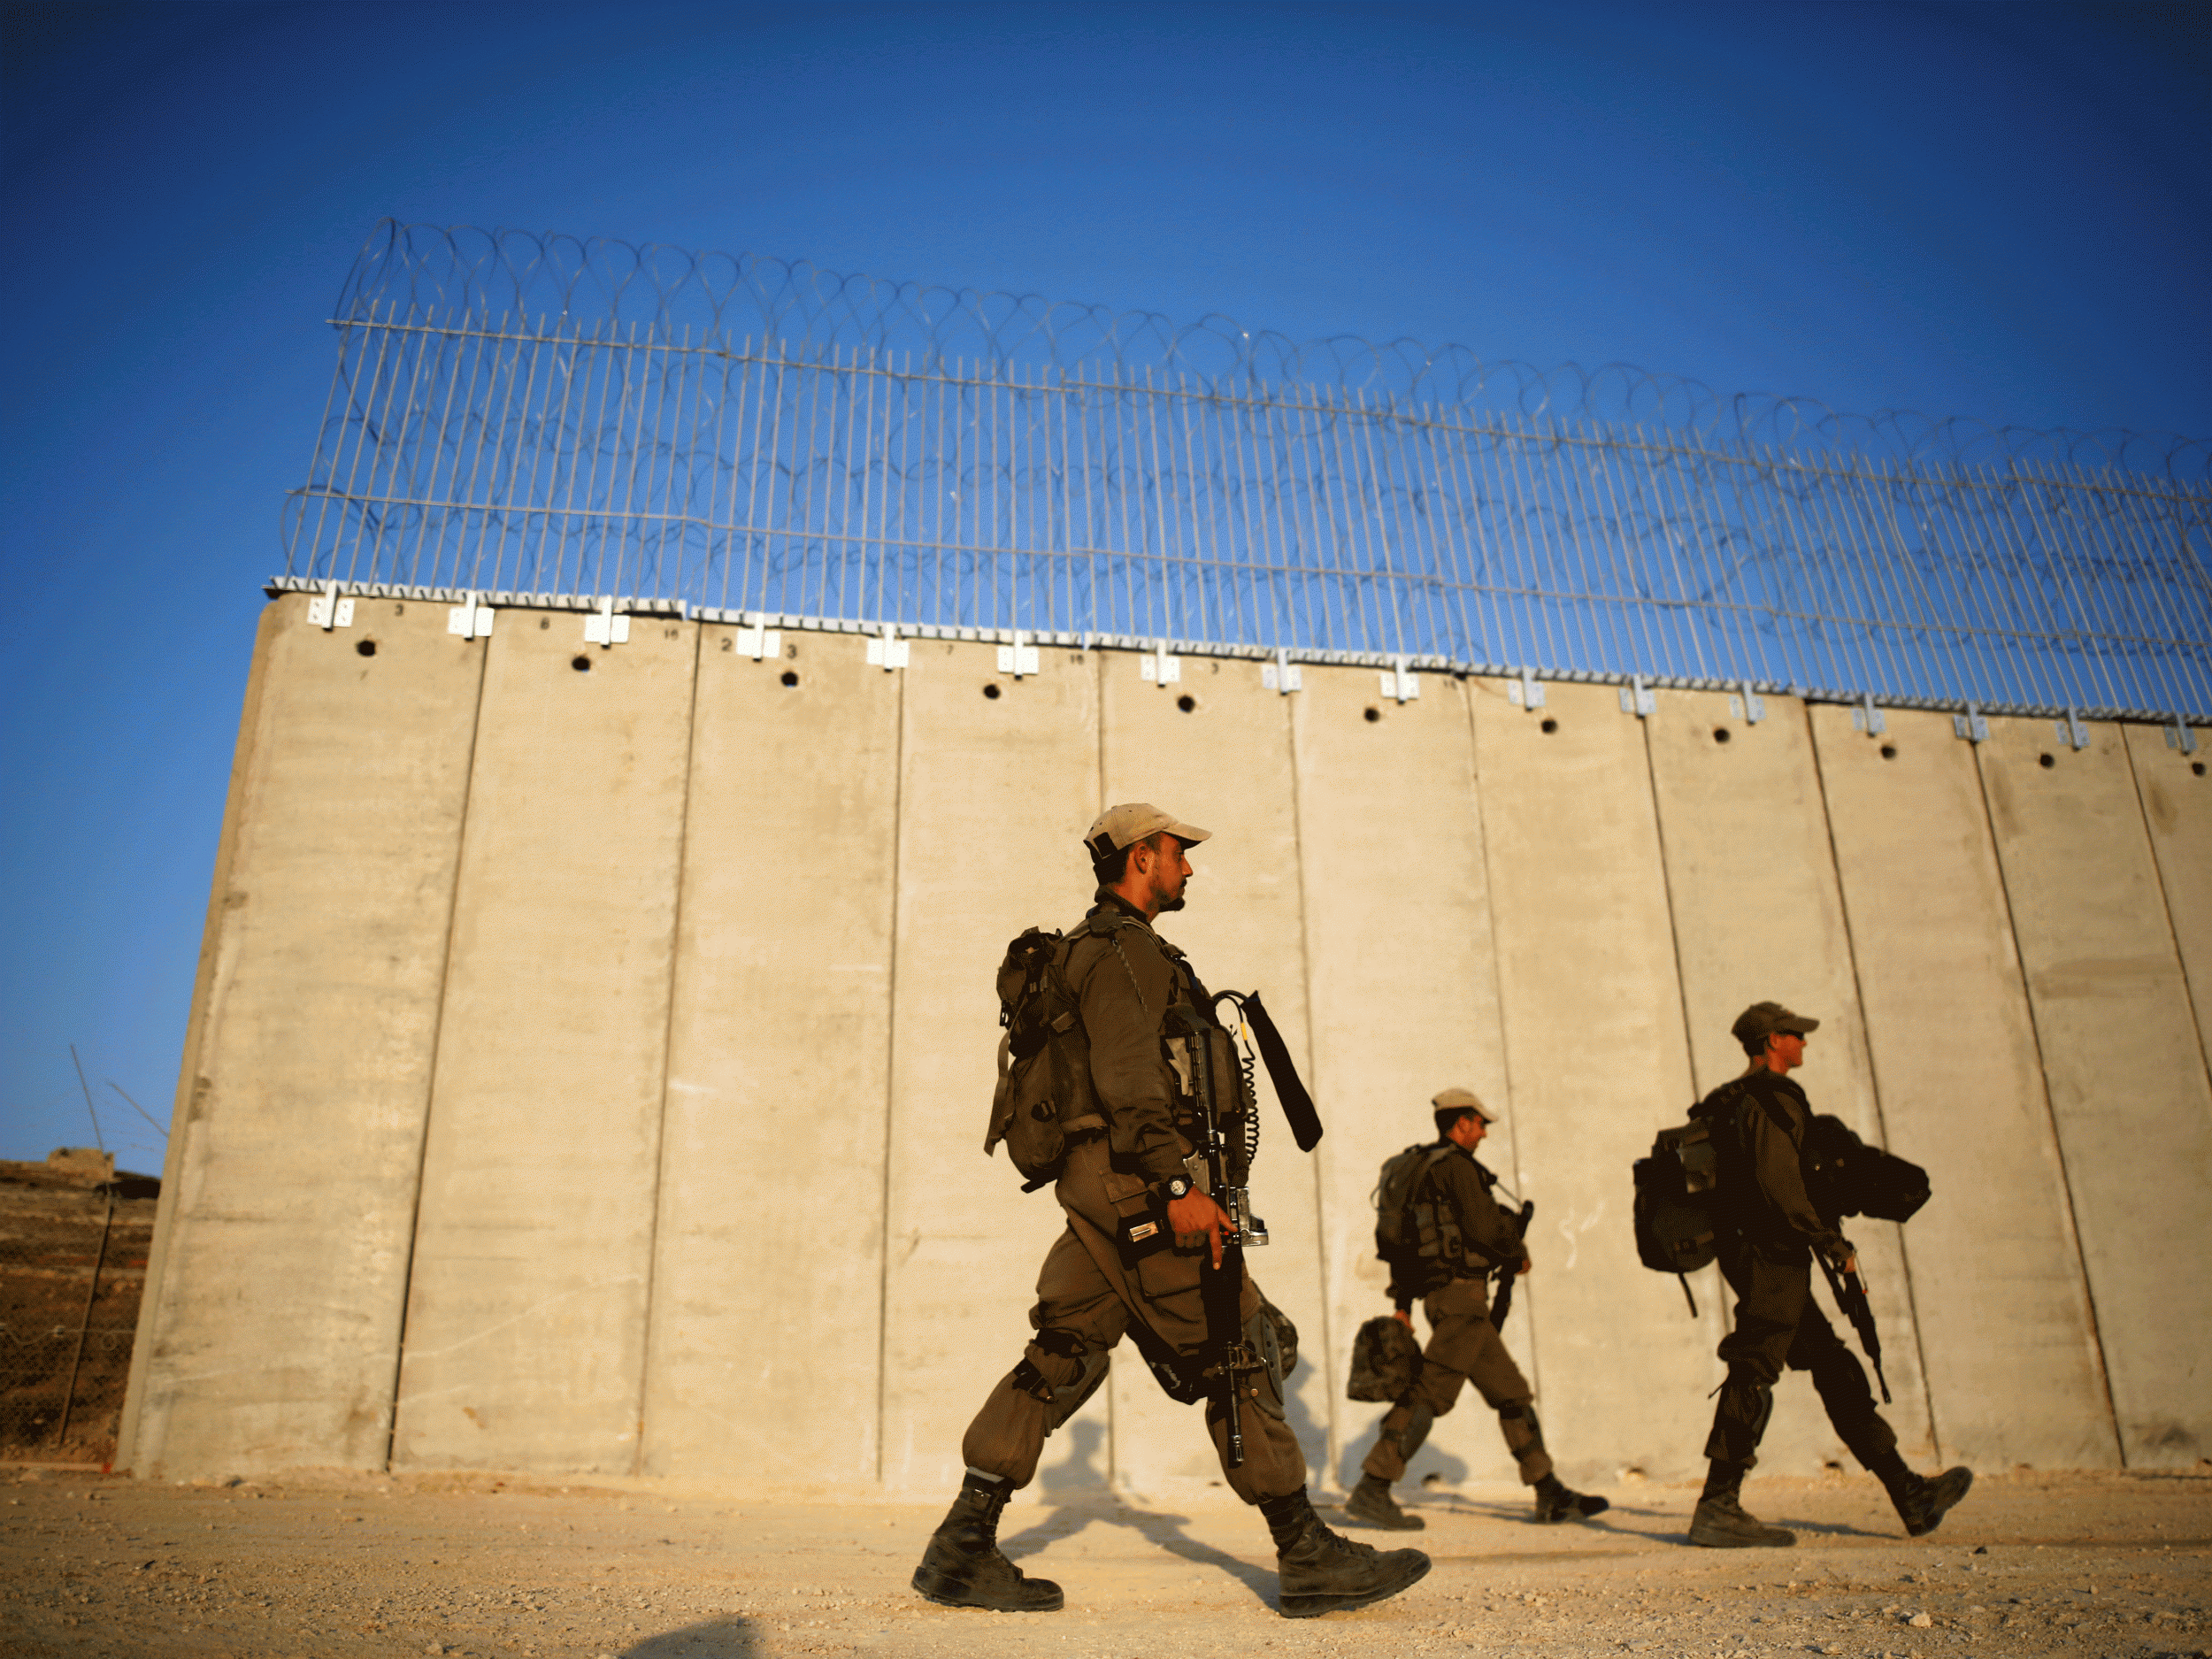 Israeli soldiers at construction on the West Bank. Palestinian minors have been held without trial in both the Russian Compound detention centre in Jerusalem and Ofer Prison in the West Bank